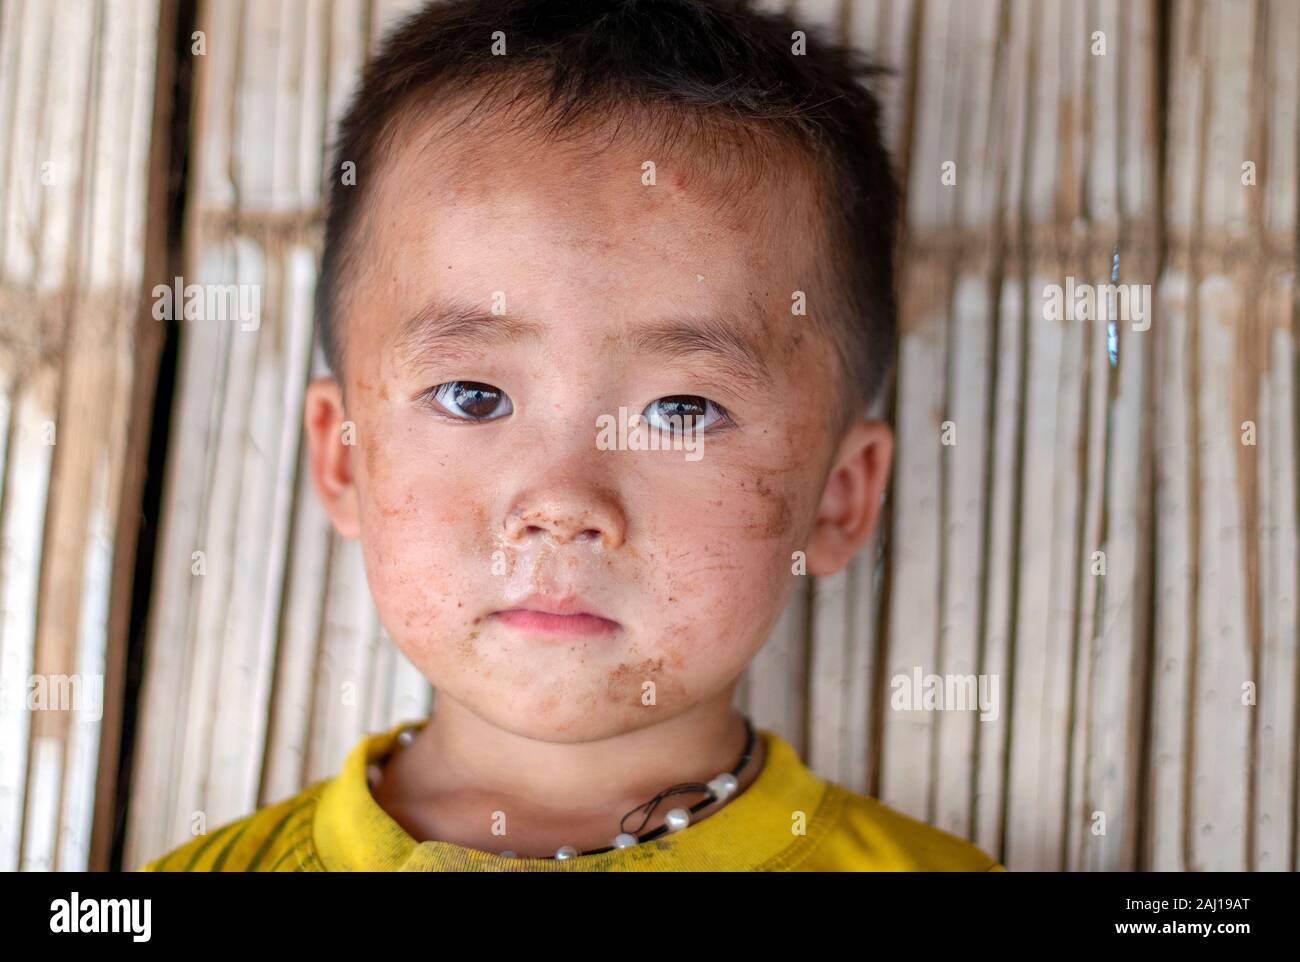 Portrait of asian boy with a dirty face Stock Photo